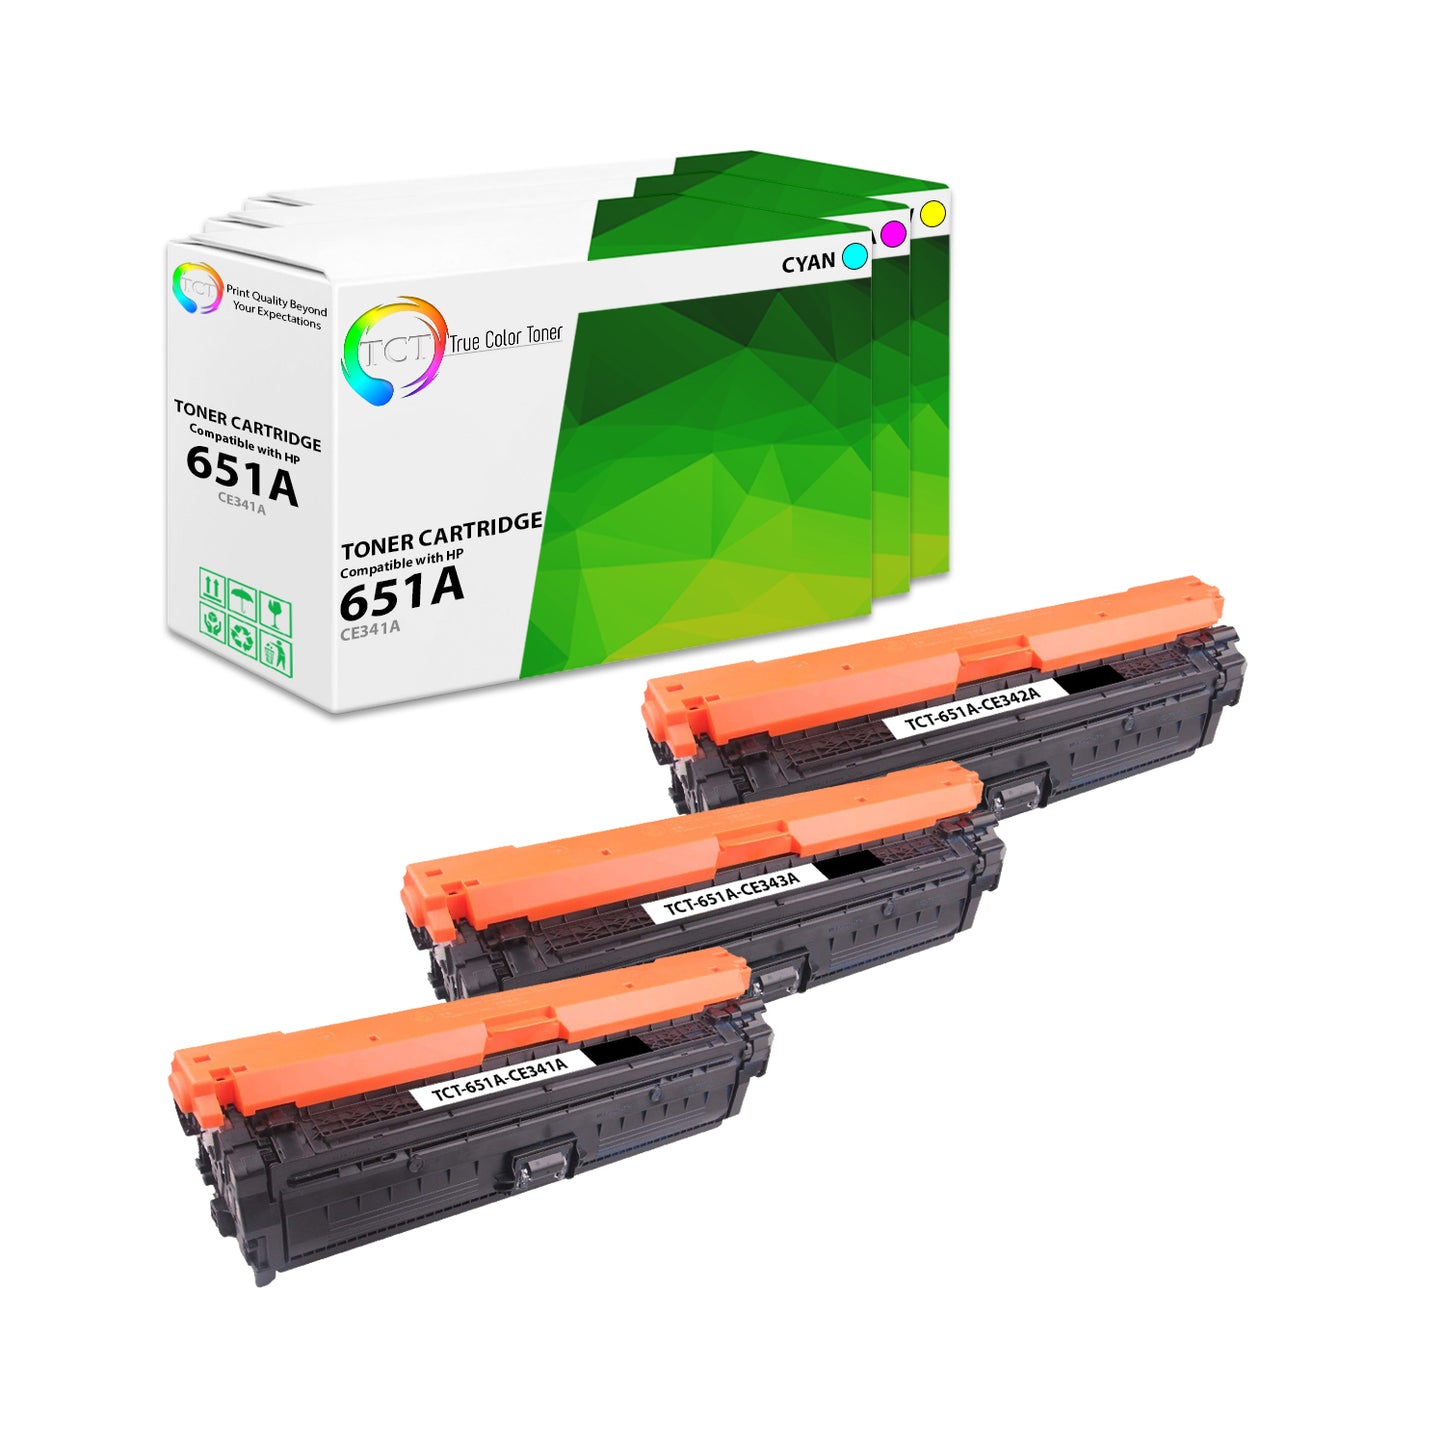 TCT Compatible Toner Cartridge Replacement for the HP 651A Series - 3 Pack (C, M, Y)